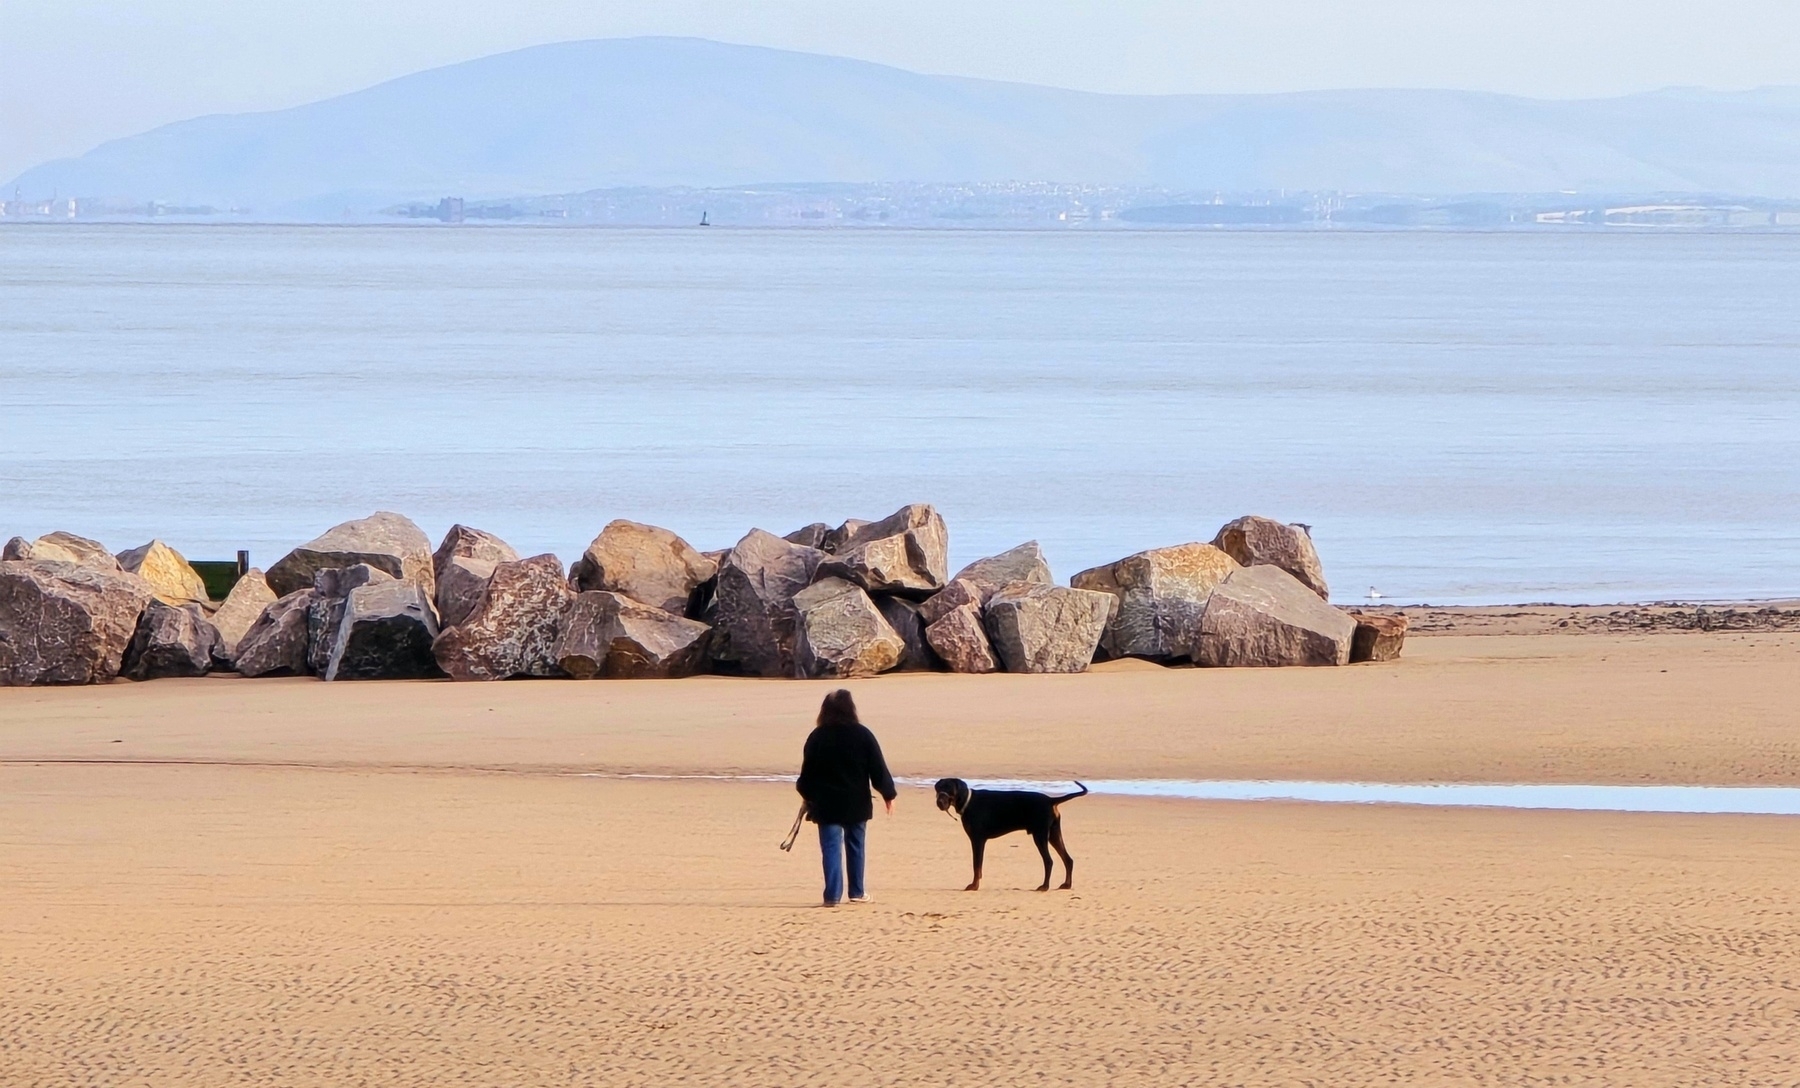 Beach scene with a lady walking her dog,  rocks in front of her,  mountains in the distance. 